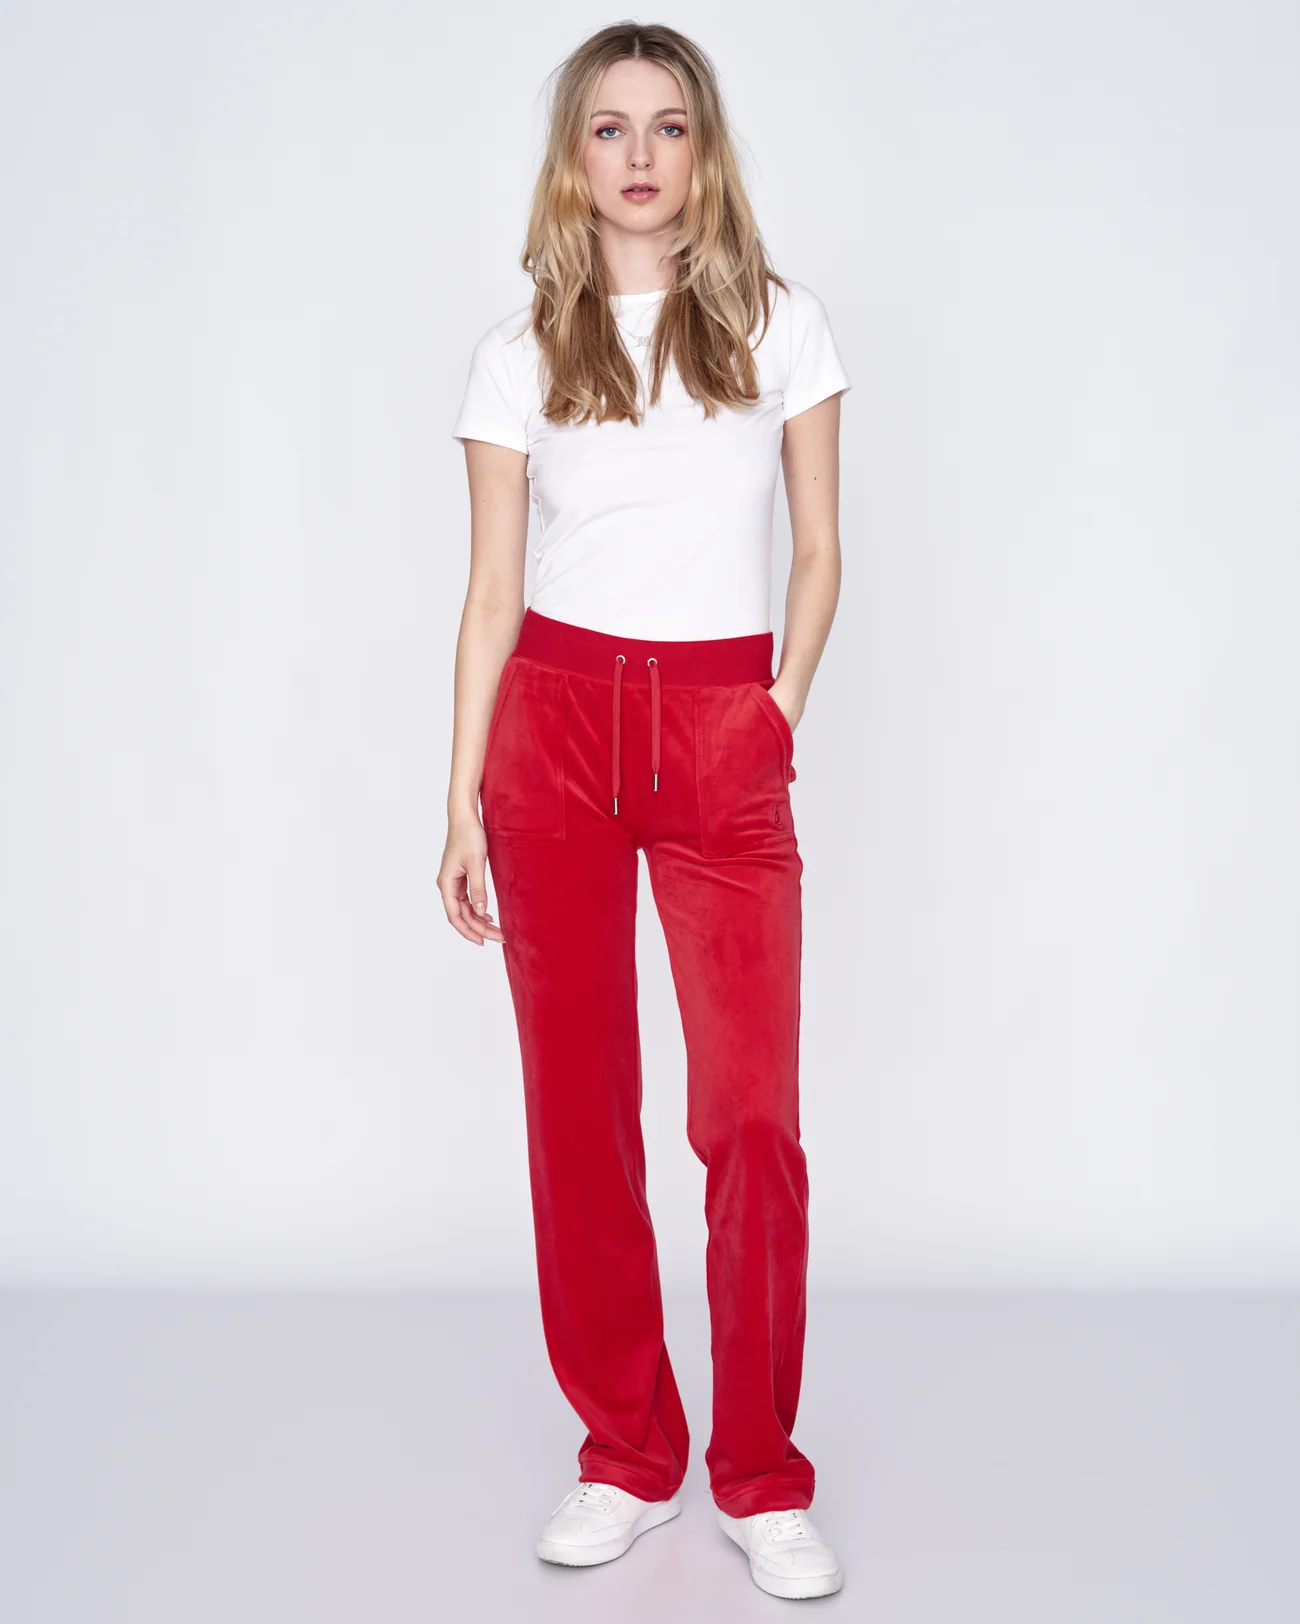 Juicy Couture - Classic Velour Del Ray Pant - Astor Red